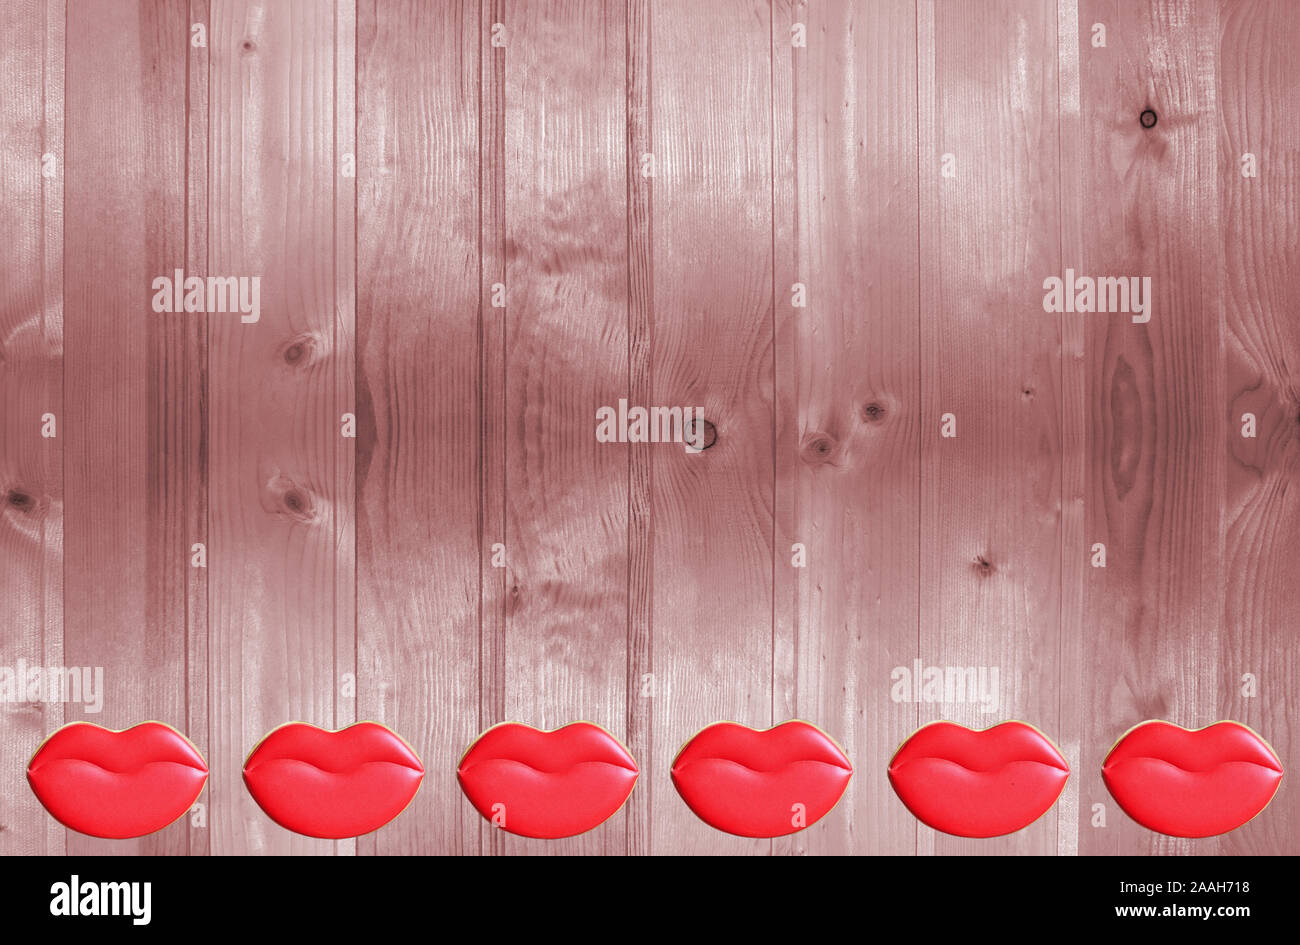 Valentine's day. Cookies in the shape of lips and heart on a wooden background. Stock Photo